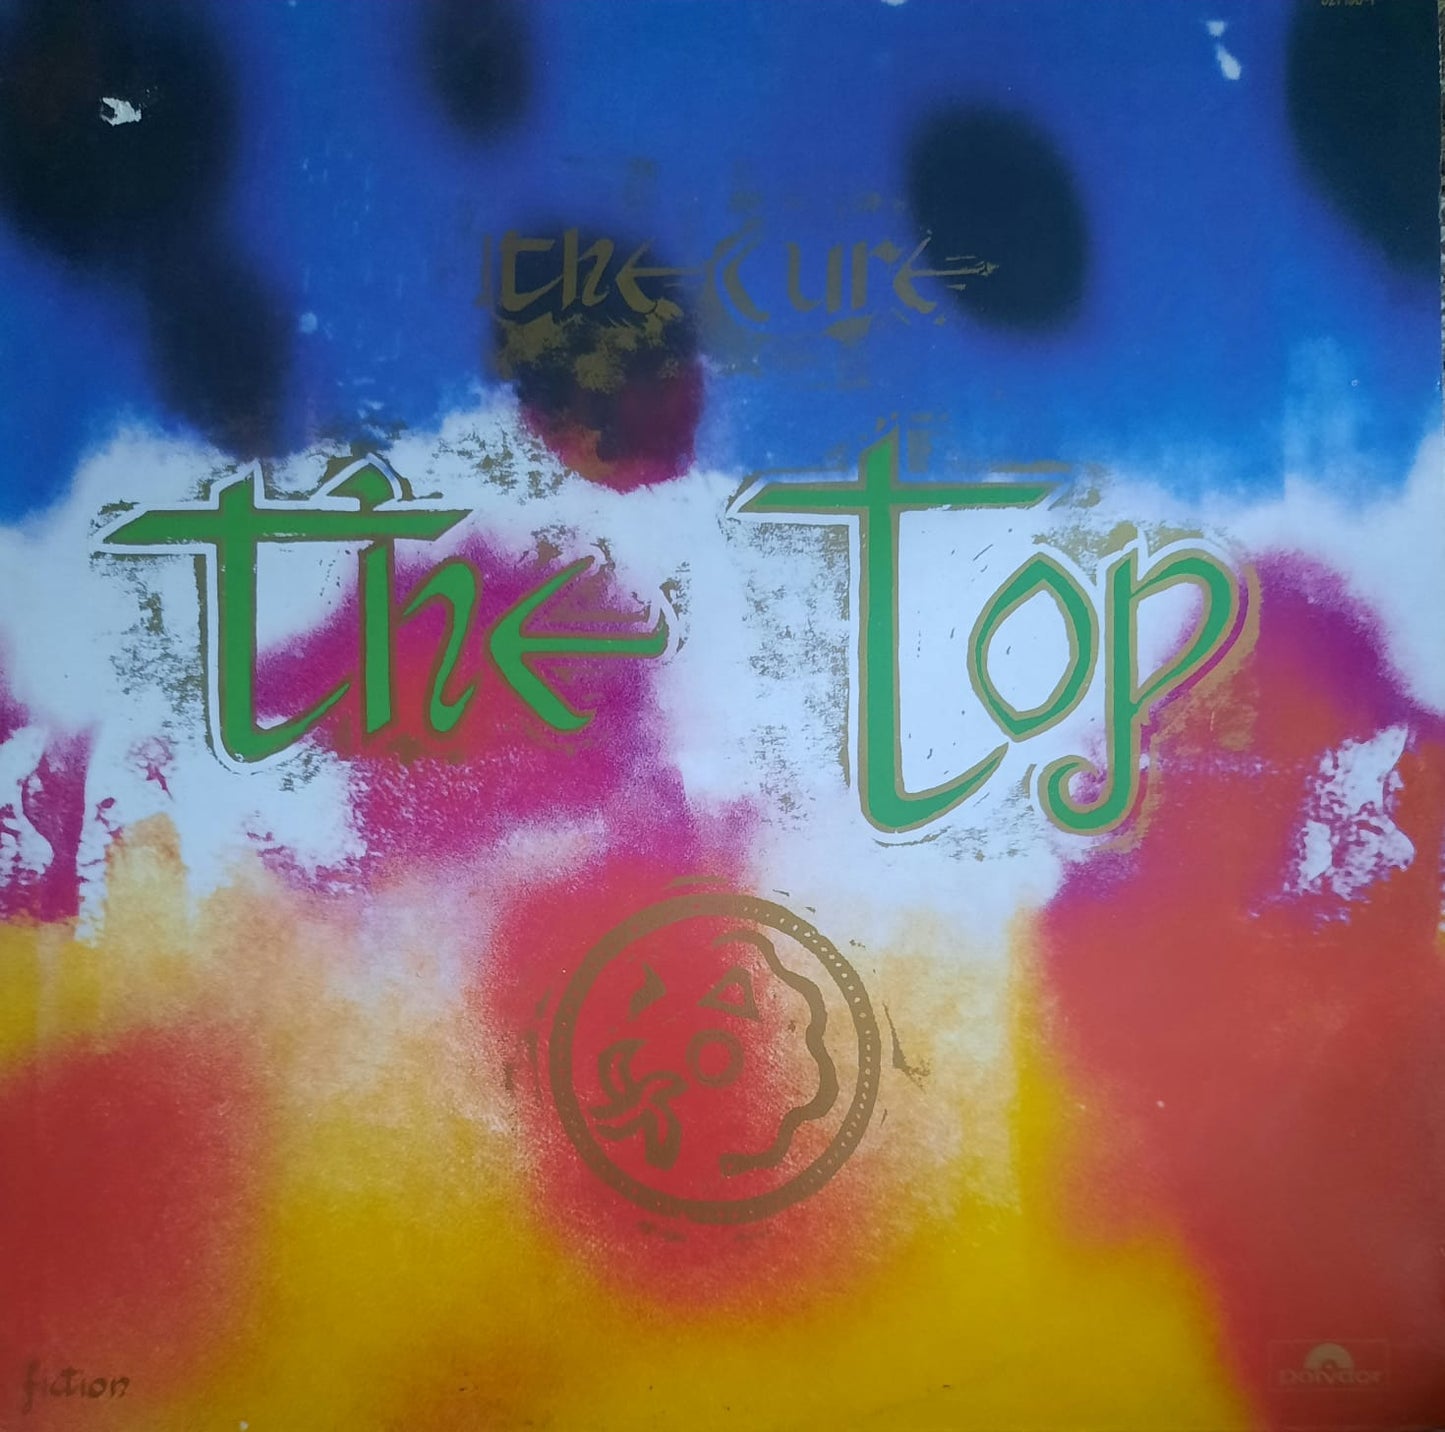 The Cure  - The Top (LP, Francia, 1984)